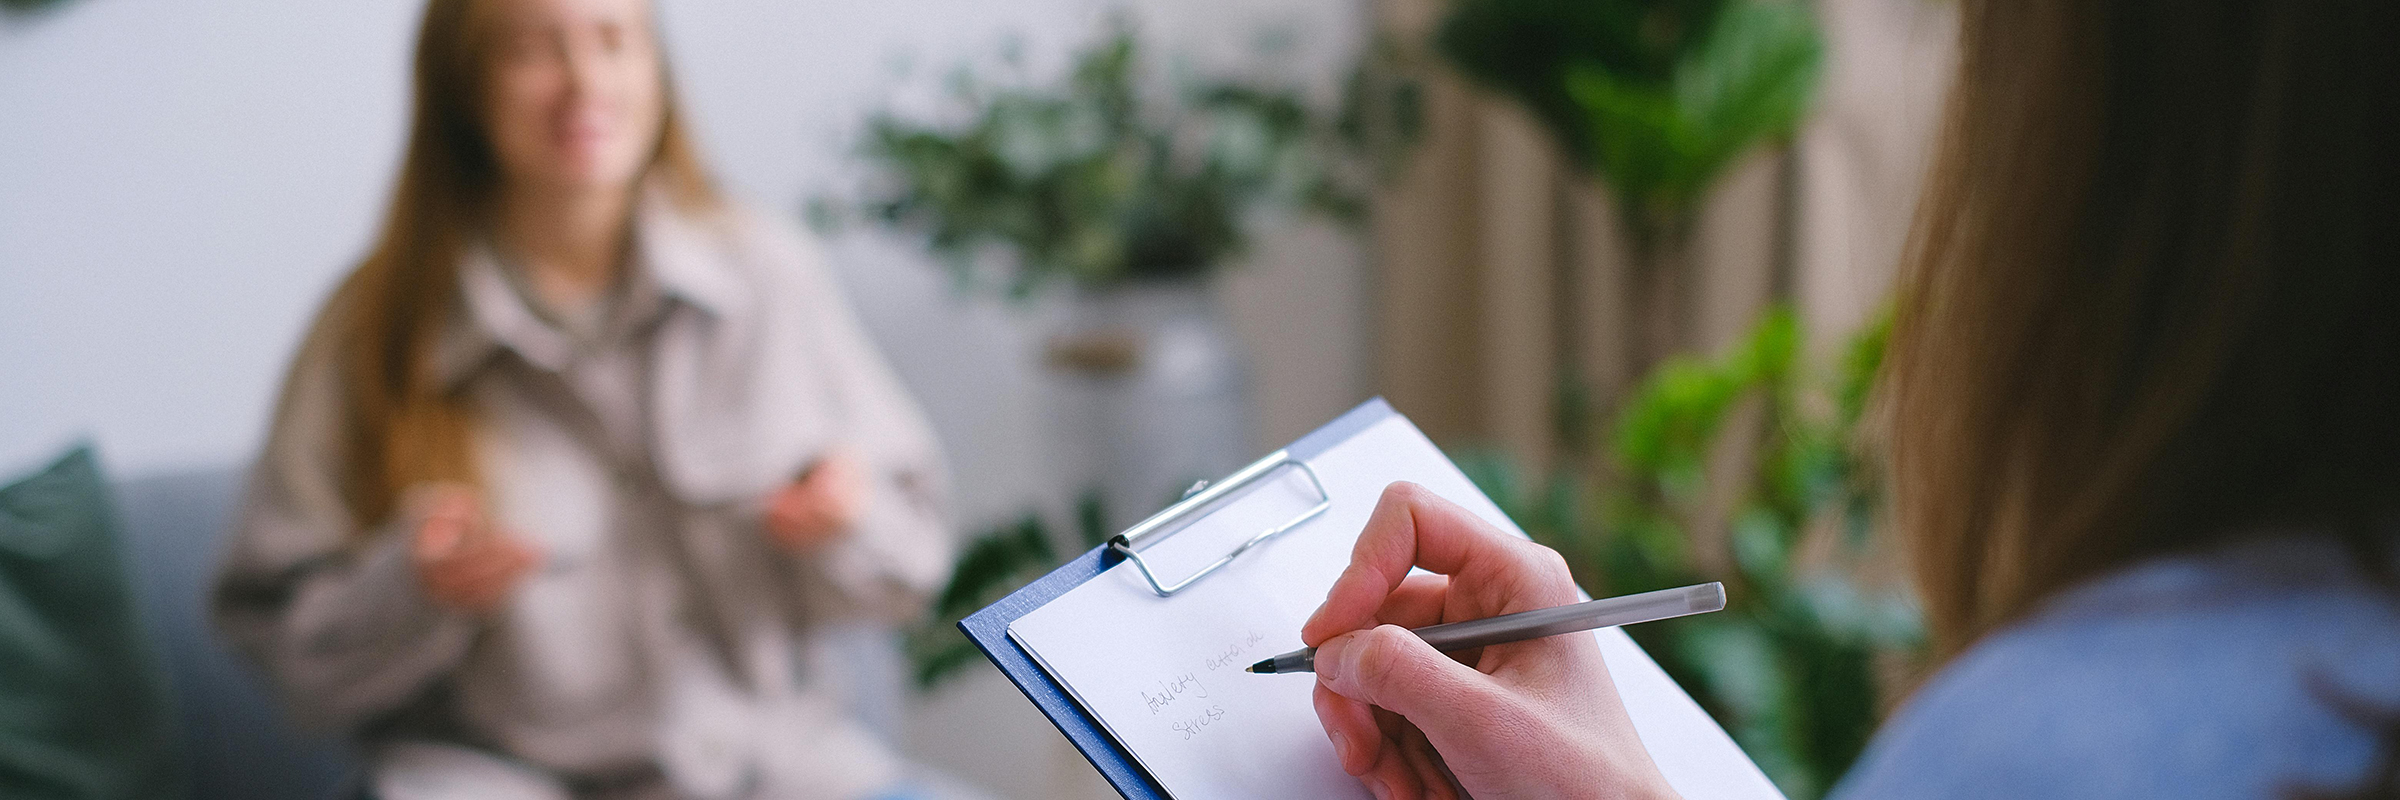 person writing on clipboard during therapy session